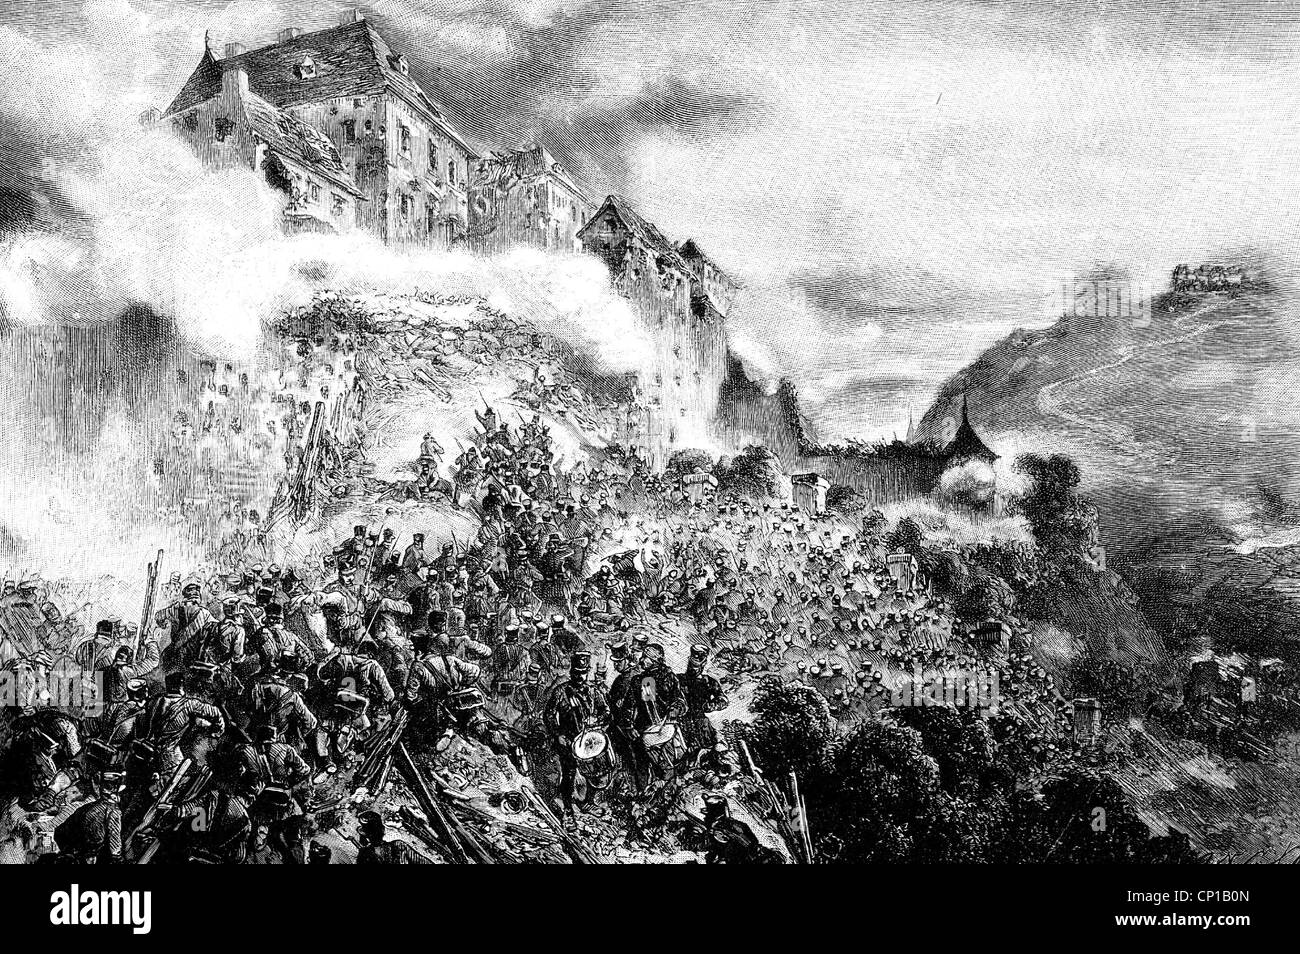 events, revolutions 1848 - 1849, uprising in Hungary 1849, assault on the fortress of Ofen which is being defended by the Austrians, 21.5.1849, after lithograph by August von Pettenkofer, 19th century, historic, historical, attack, Austrian troops under General Hentzy, insurgents, Honved, fight, battle, people, Additional-Rights-Clearences-Not Available Stock Photo